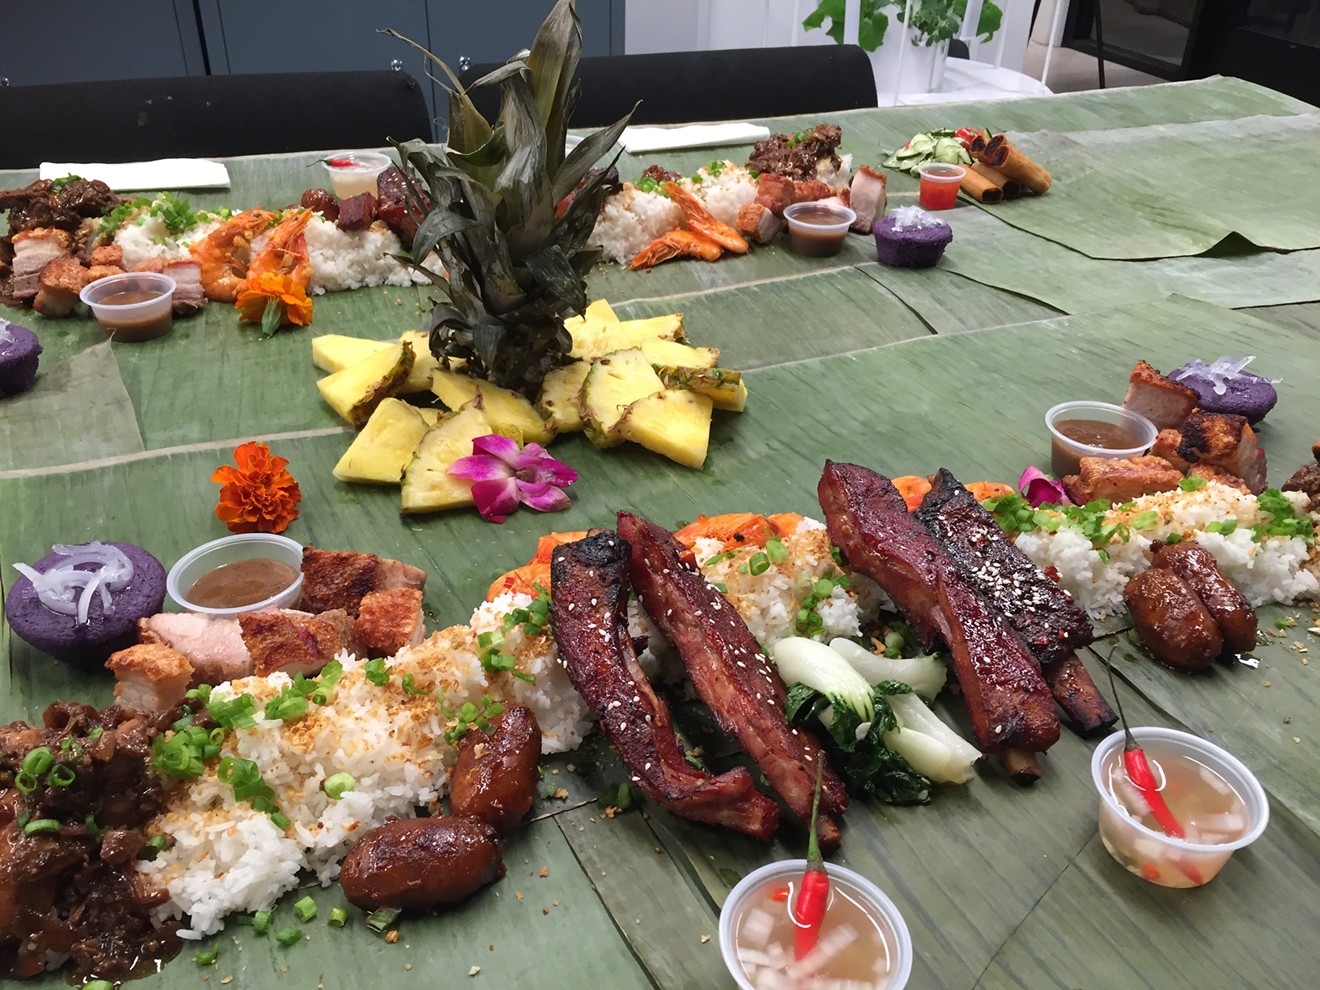 Tayo's Kamayan dinner at Fuerza Local Community Kitchen in Mesa features chicken adobo, lechon kawali, longganisa, and other Filipino foods.